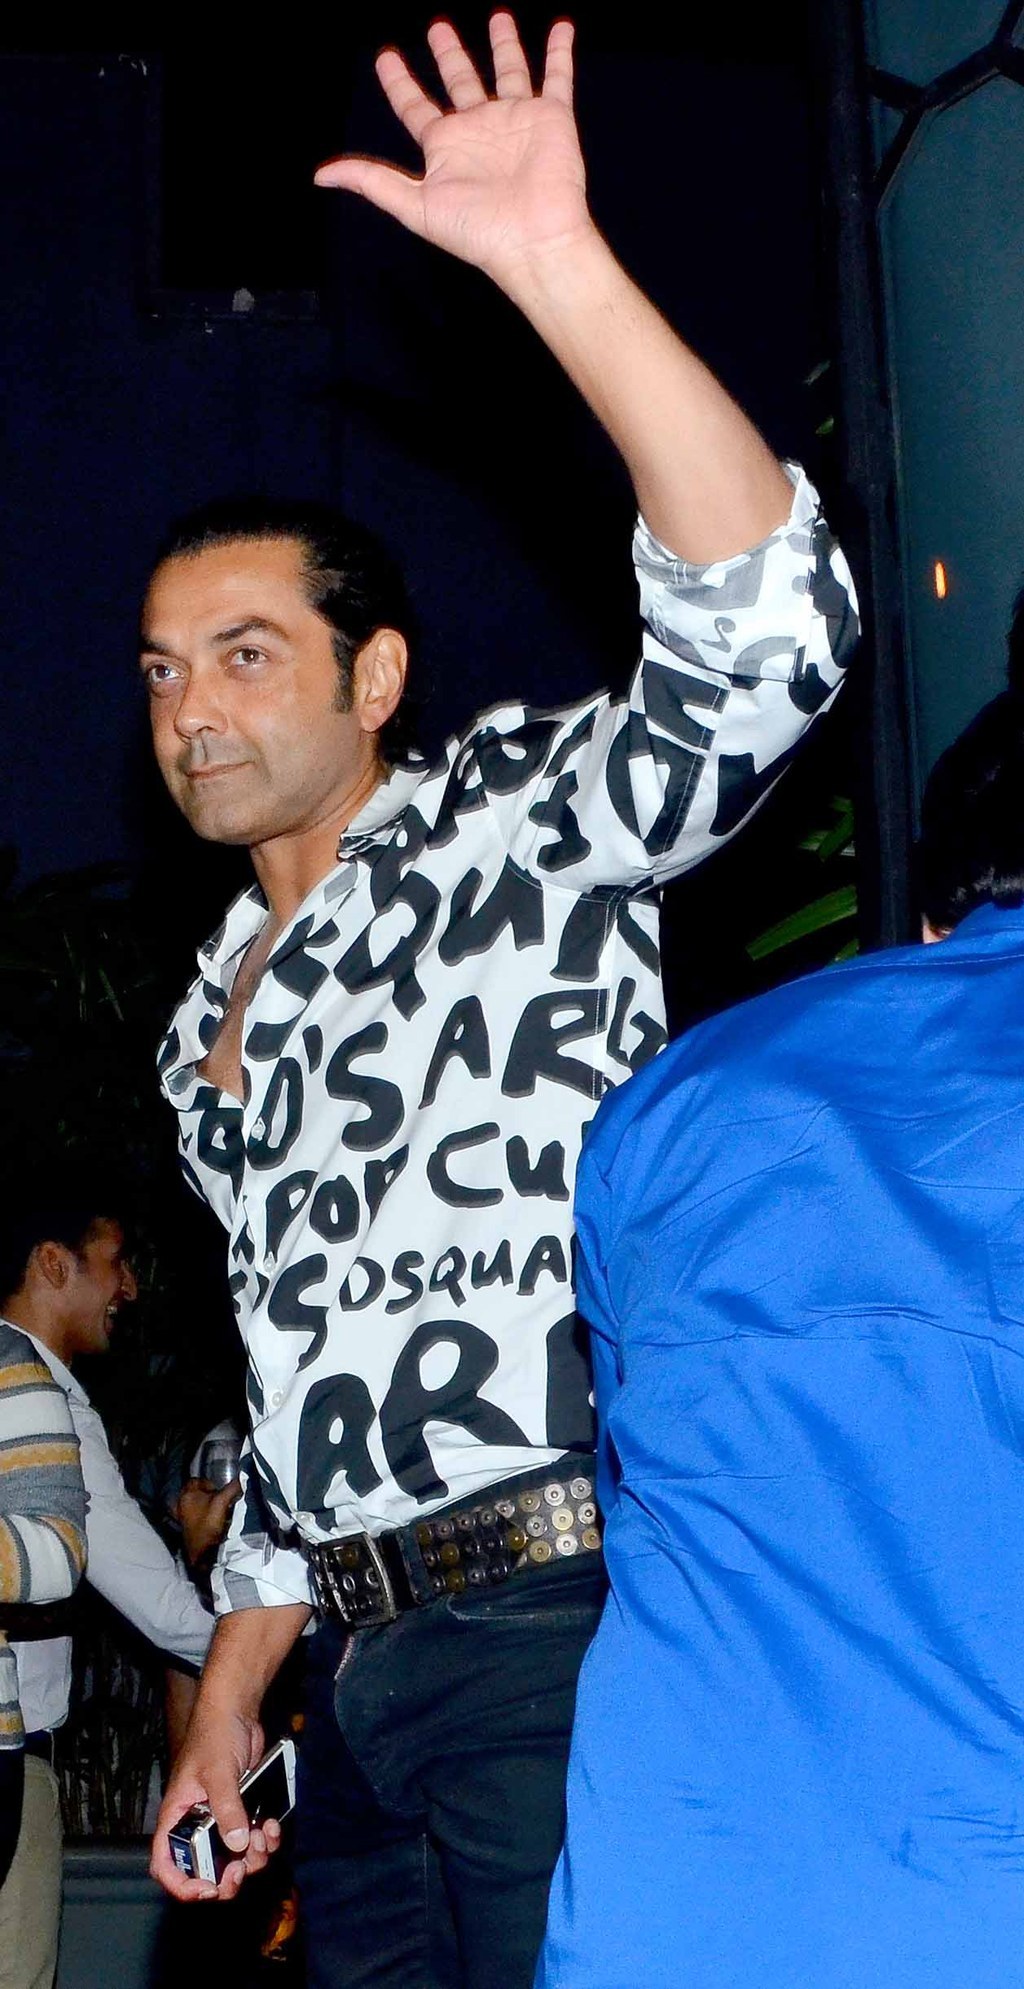 Bobby Deol Wore The Most Ridiculous Shirt To A Party But Totally Pulled It